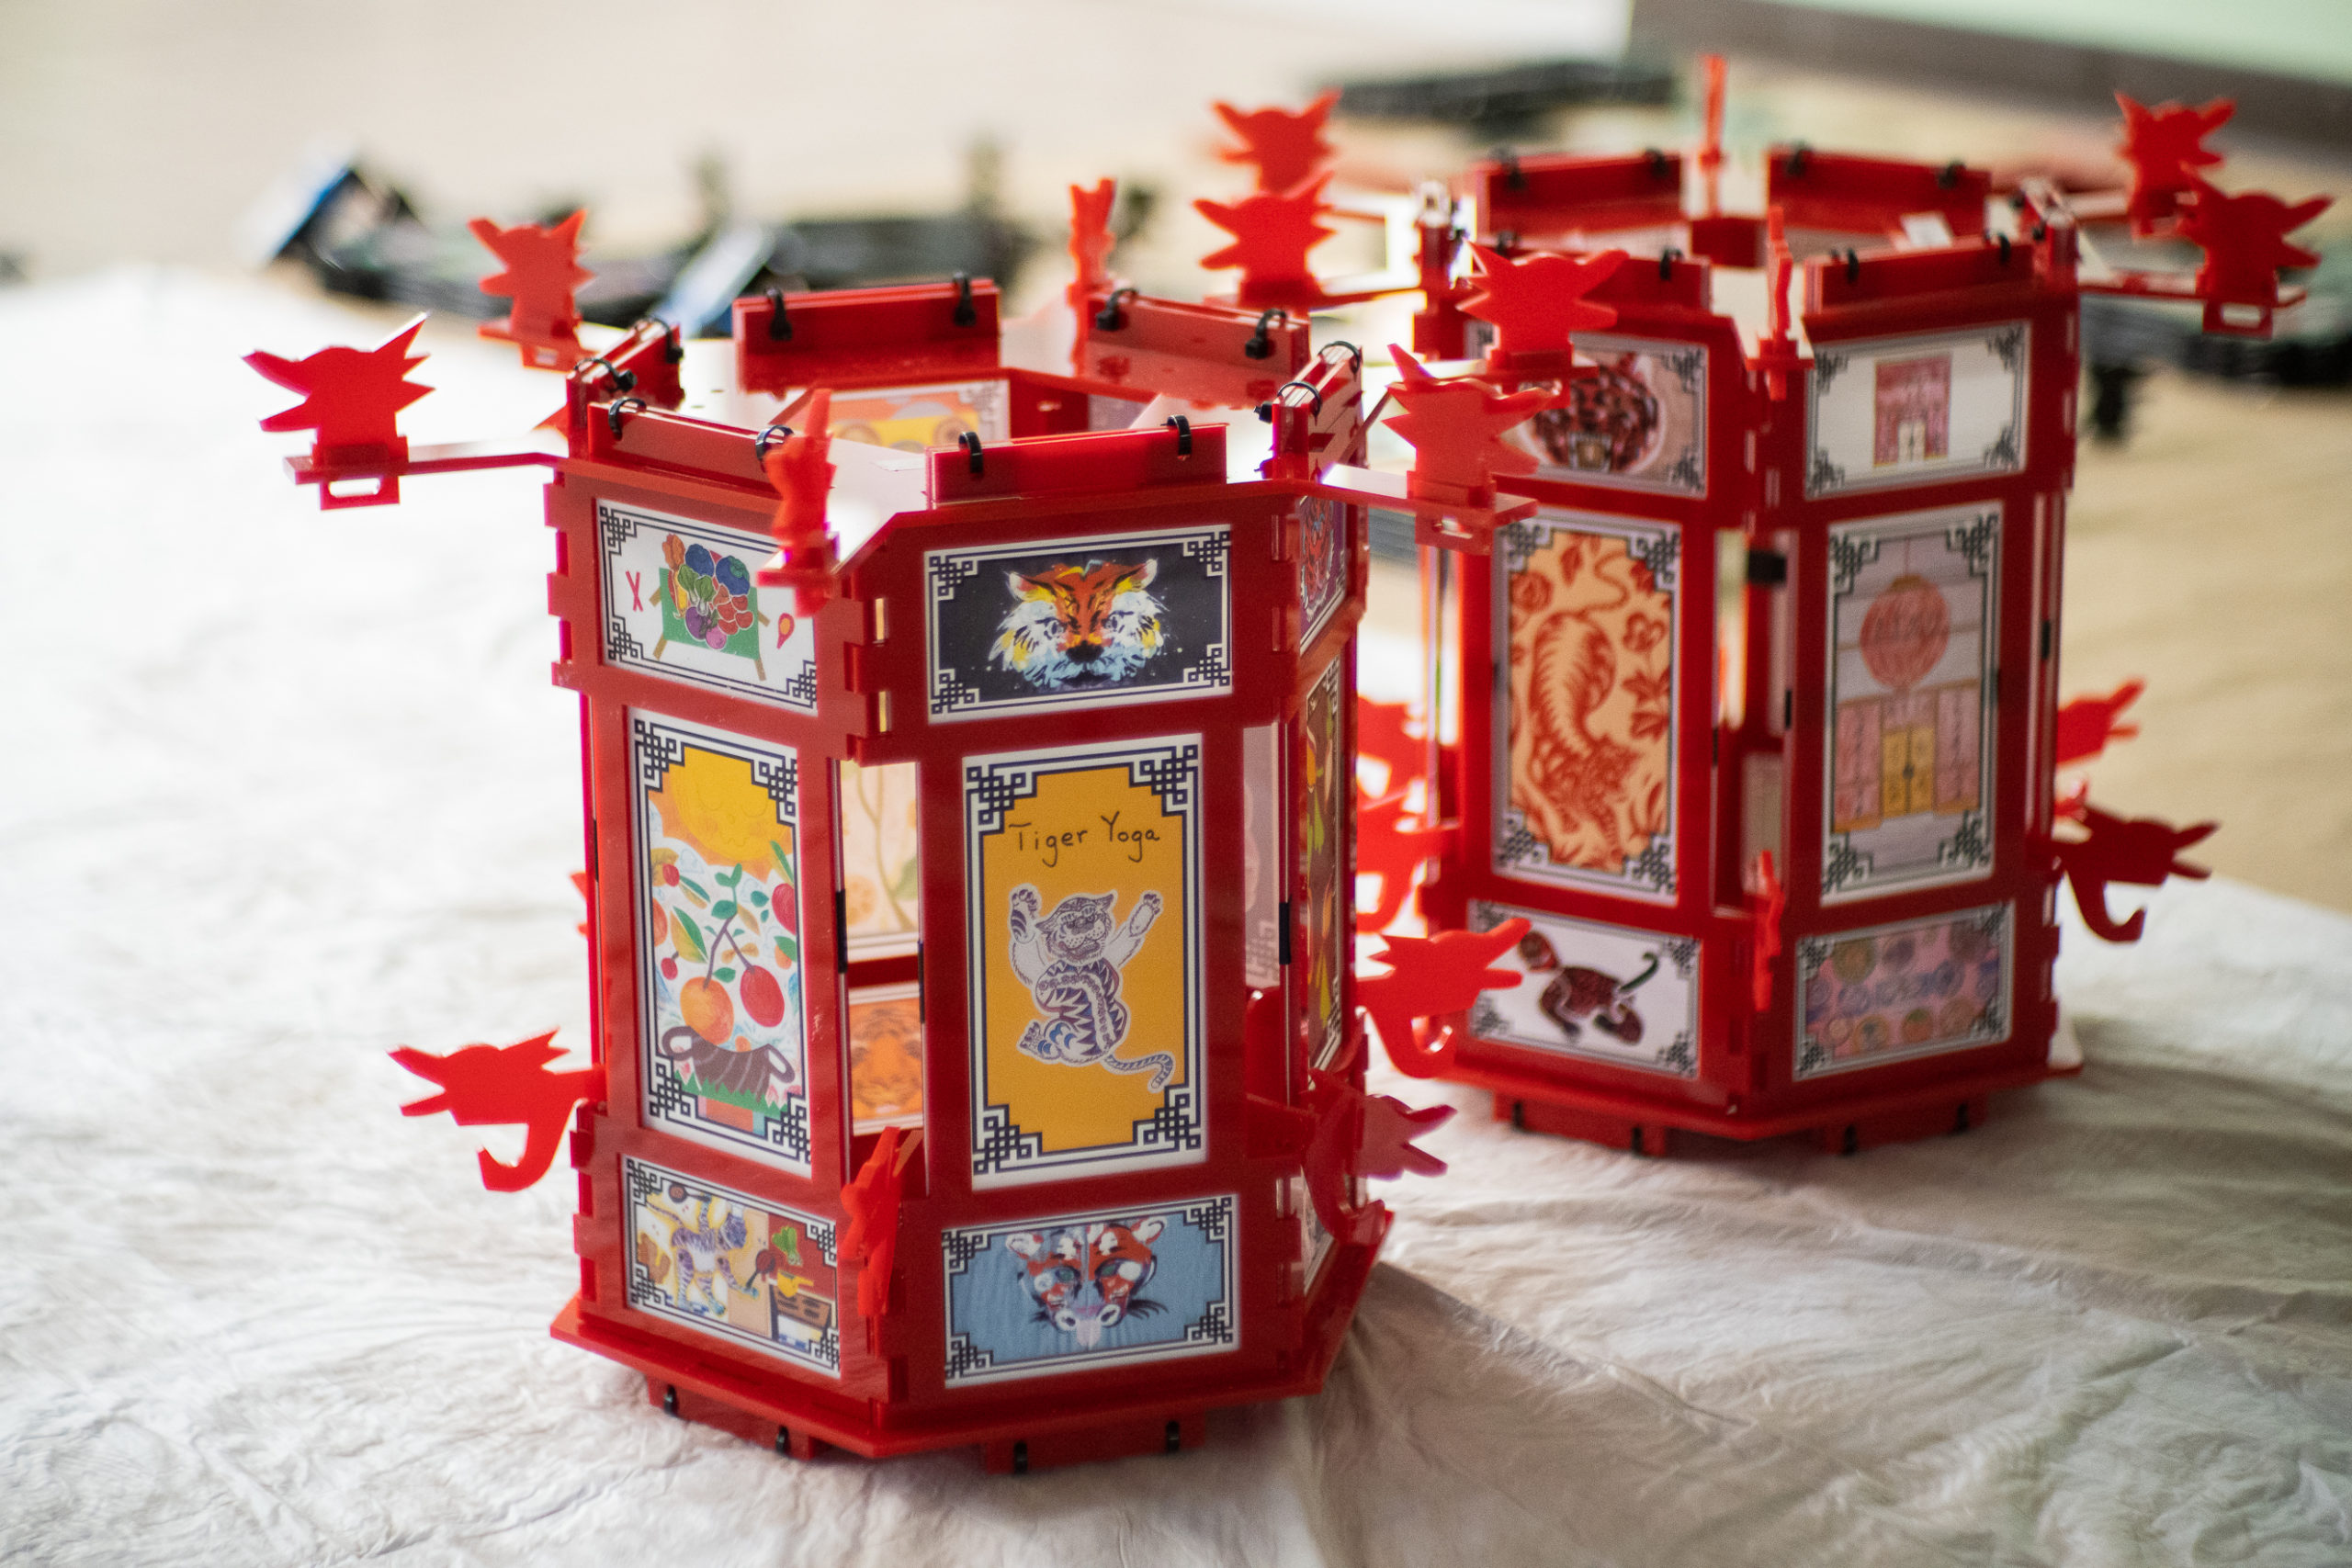 Photo of two red palace lanterns from the Yue Moon exhibit, sitting on the floor. The lantern holds different artwork featuring Lunar New Year imagery of foods and tigers.